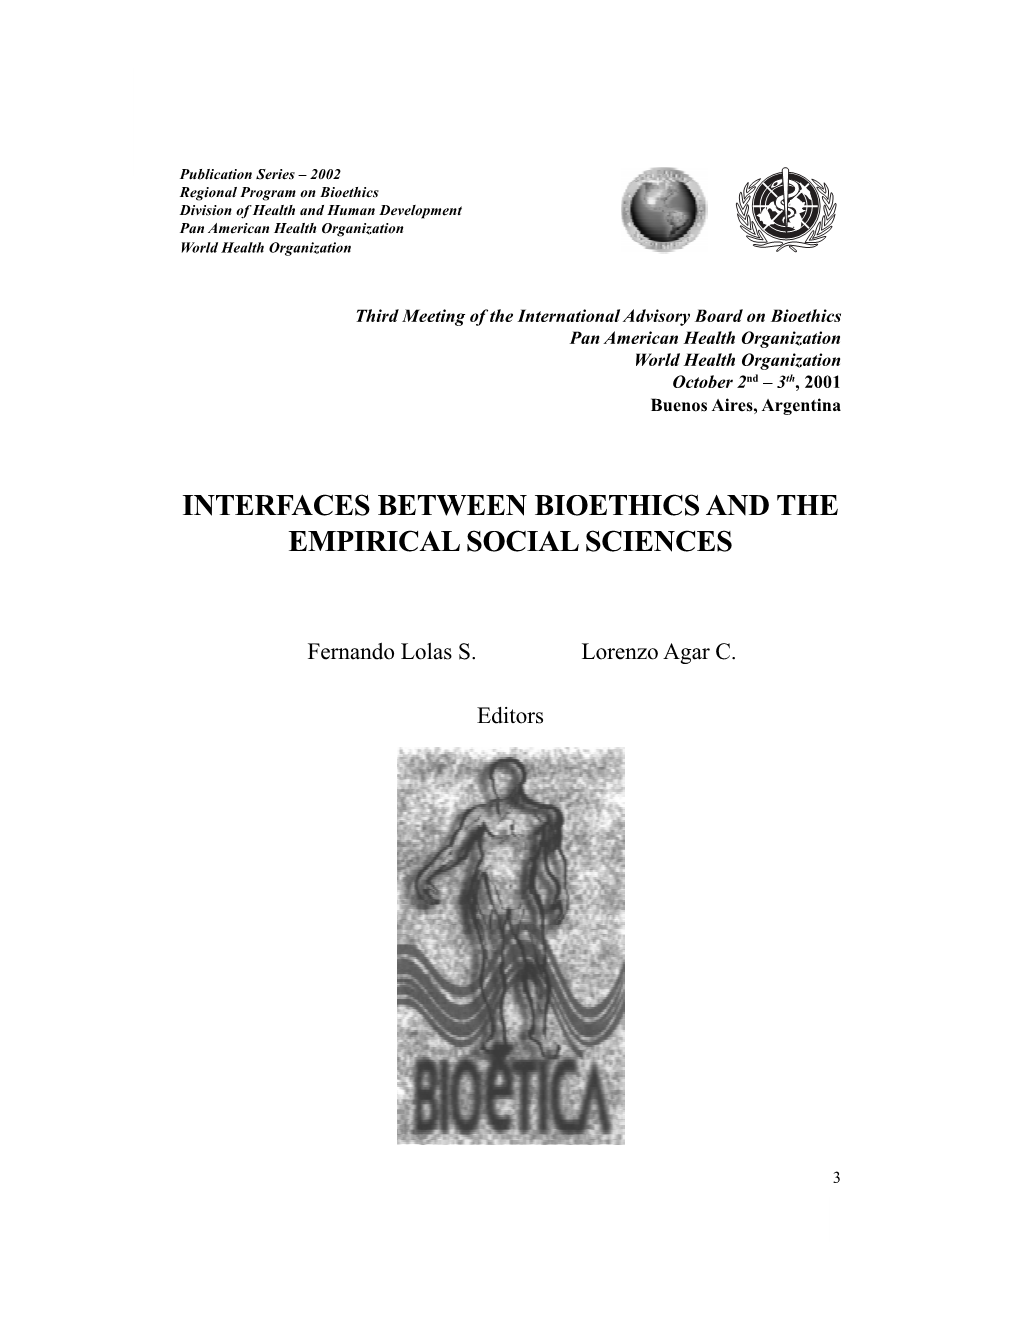 Interfaces Between Bioethics and the Empirical Social Sciences